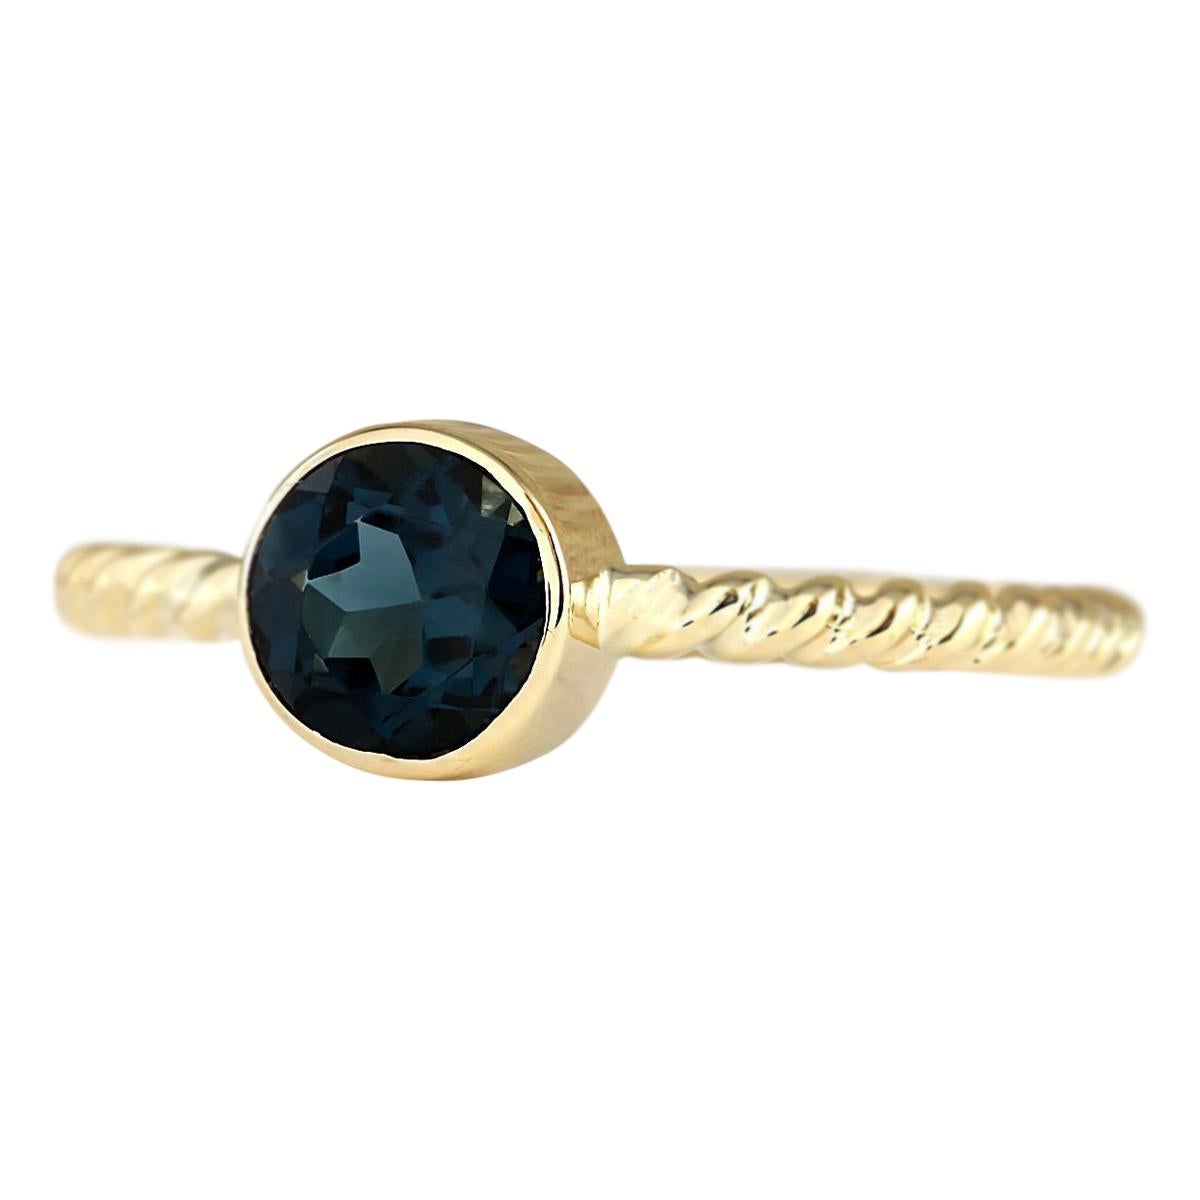 Stamped: 14K Yellow Gold
Total Ring Weight: 2.2 Grams
Total Natural Topaz Weight is 1.00 Carat
Color: London Blue
Face Measures: 6.00x6.00 mm
Sku: [703227W]